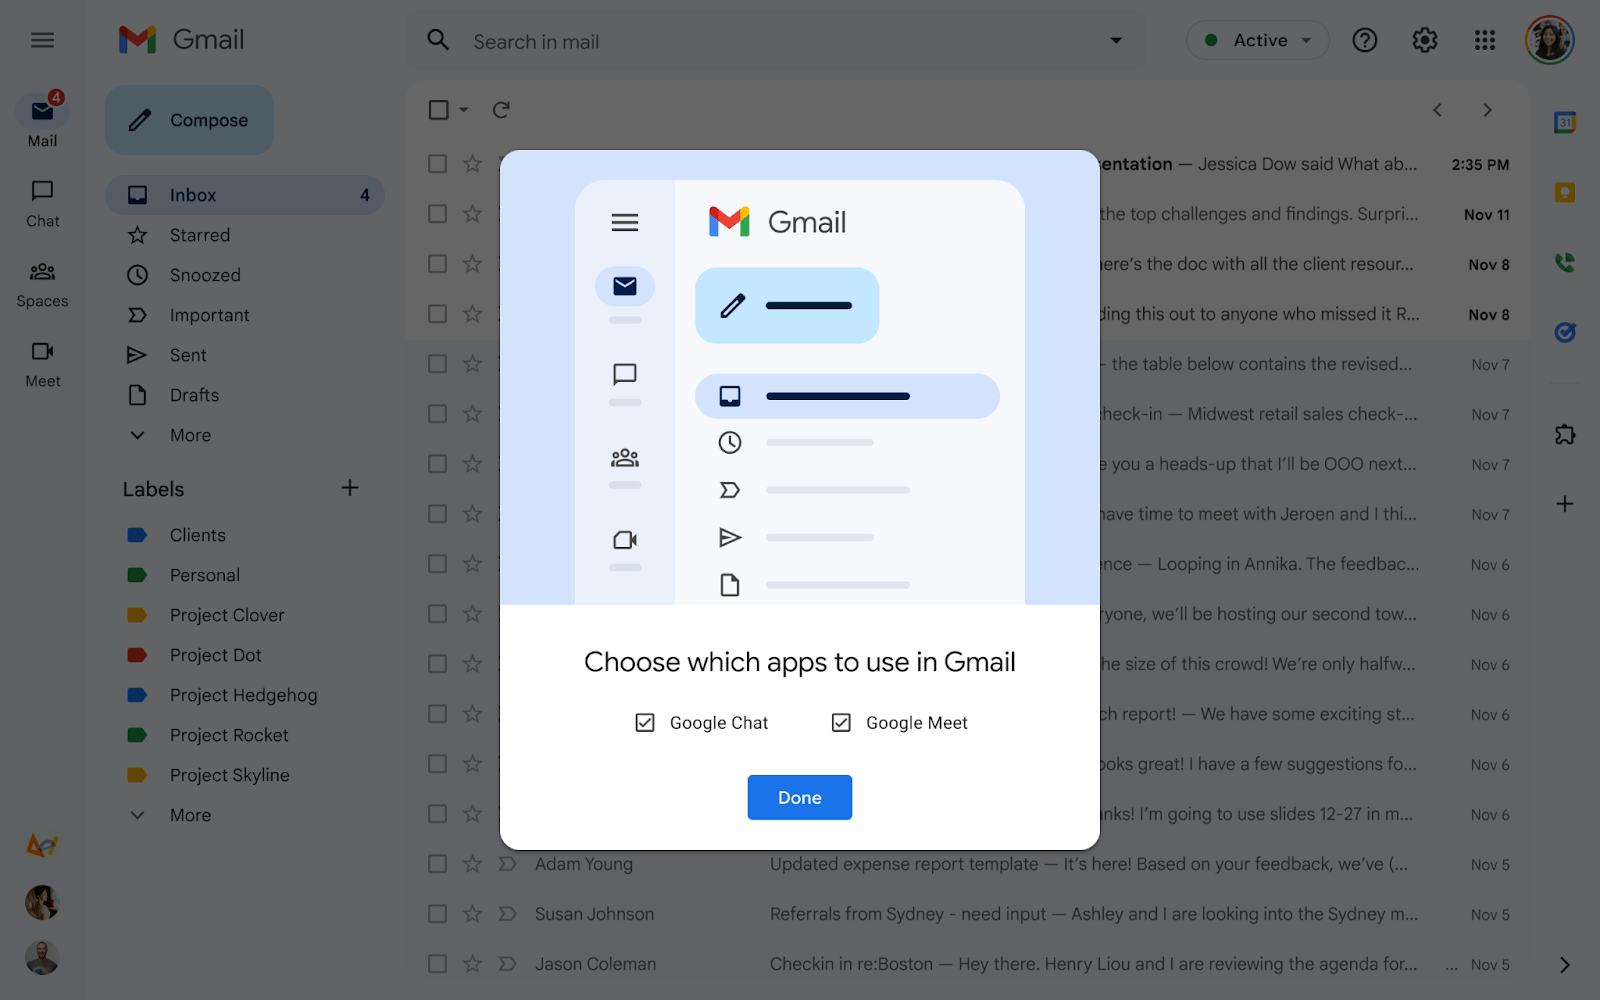 Gmail-only view